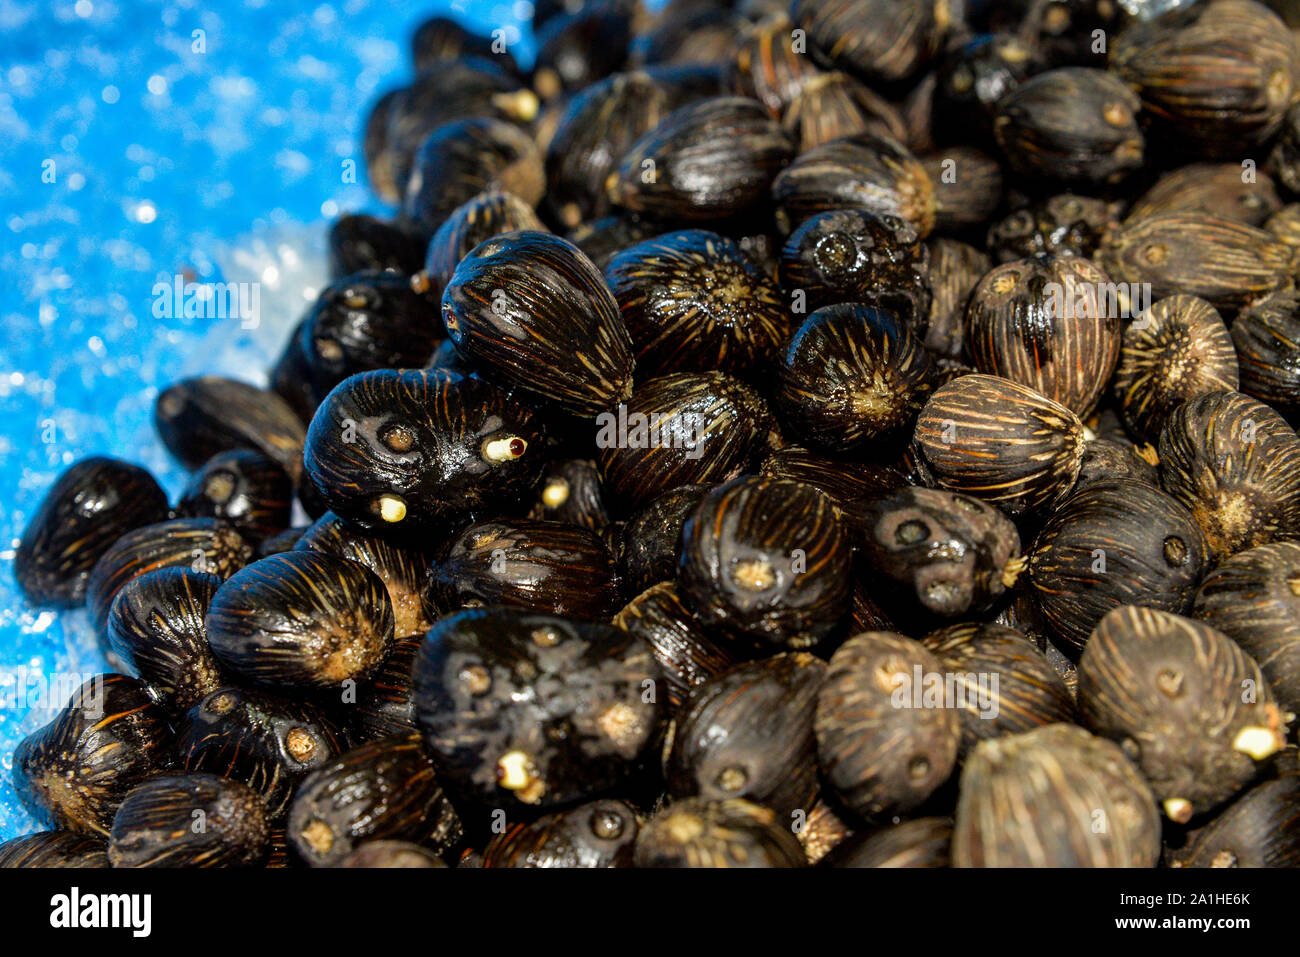 Oil palm geminated seeds with some blurry effect in a plastic tray ready for shorting process in a oil palm seeds production lab. Stock Photo